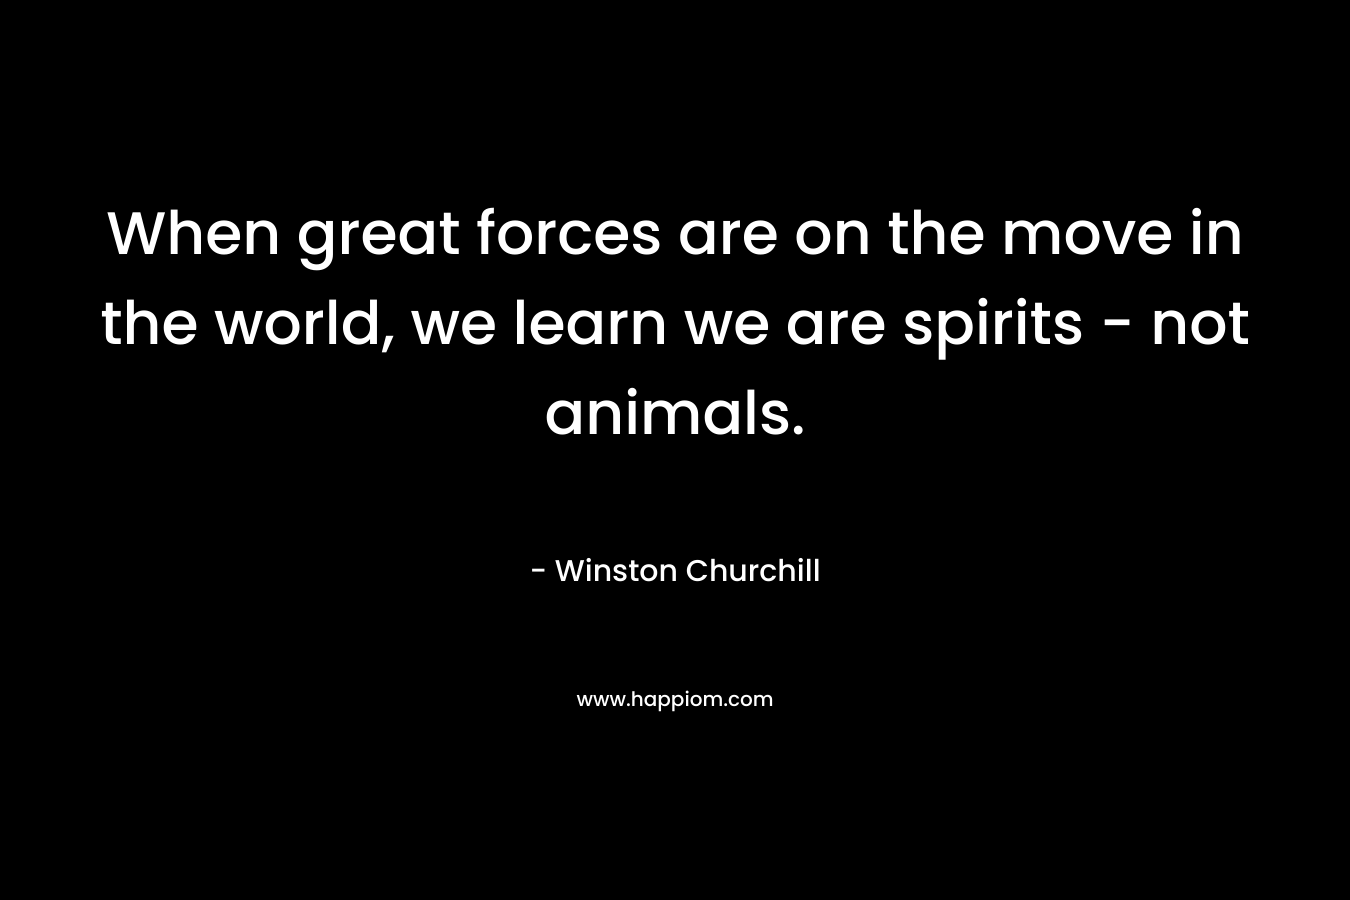 When great forces are on the move in the world, we learn we are spirits - not animals.